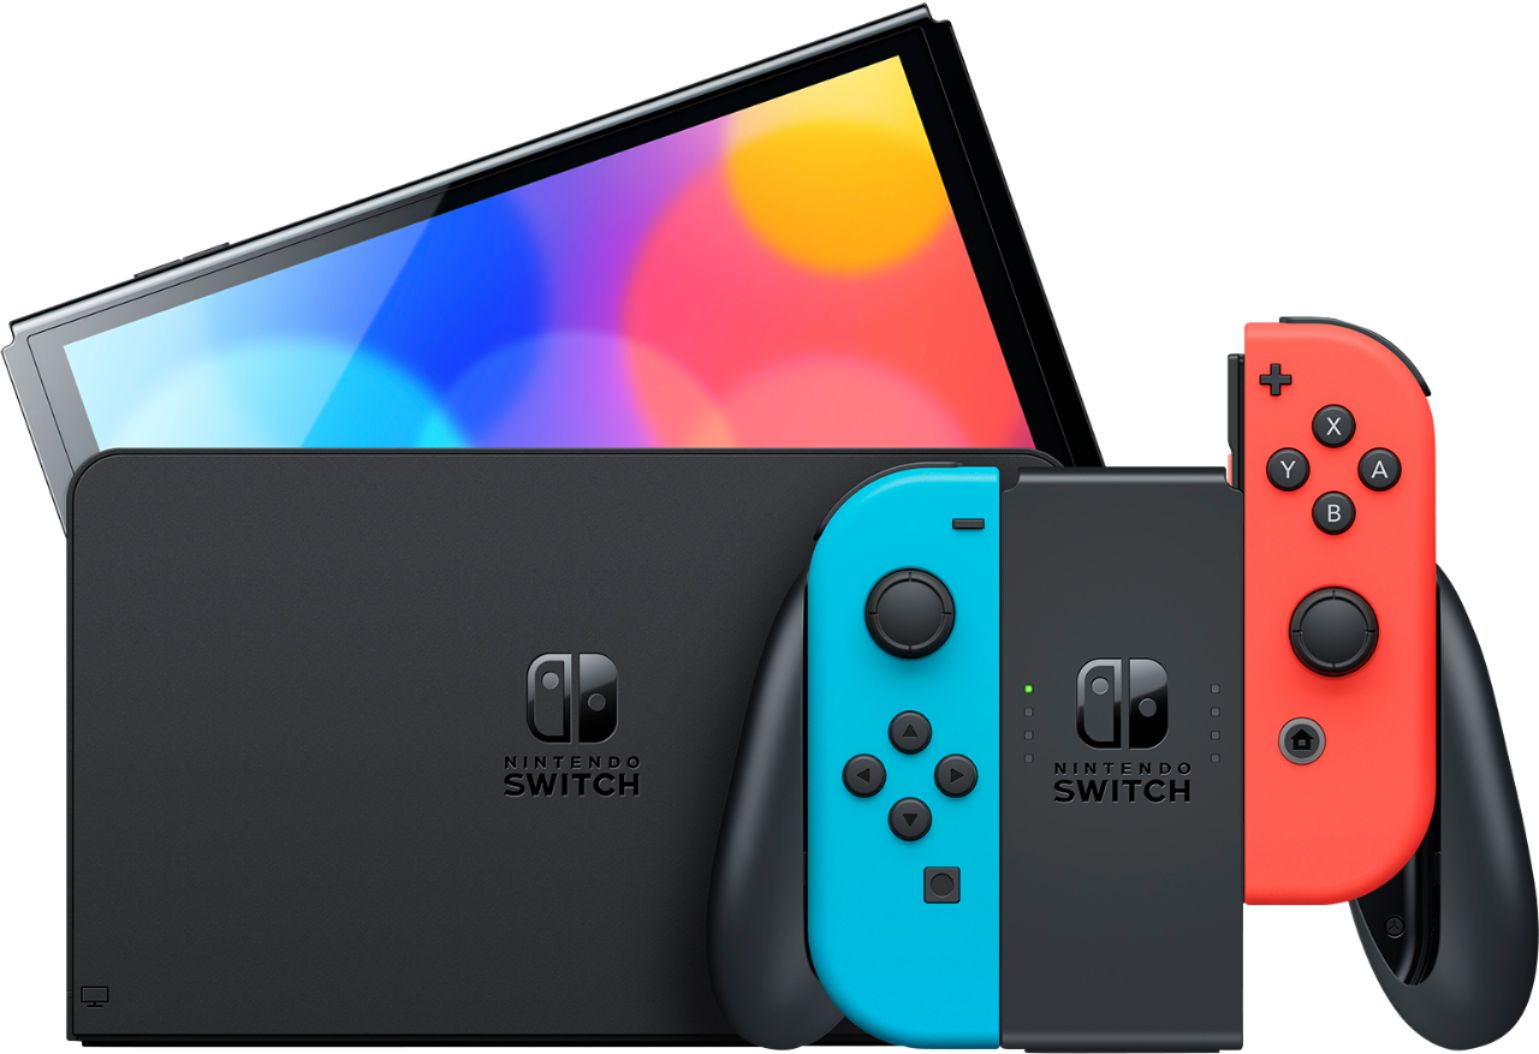 2022 New Nintendo Switch OLED Model Neon Red Blue with Fire Emblem: Three Houses and Mytrix Full Body Skin Sticker for NS OLED Console, Dock and Joycons - Sushi Set